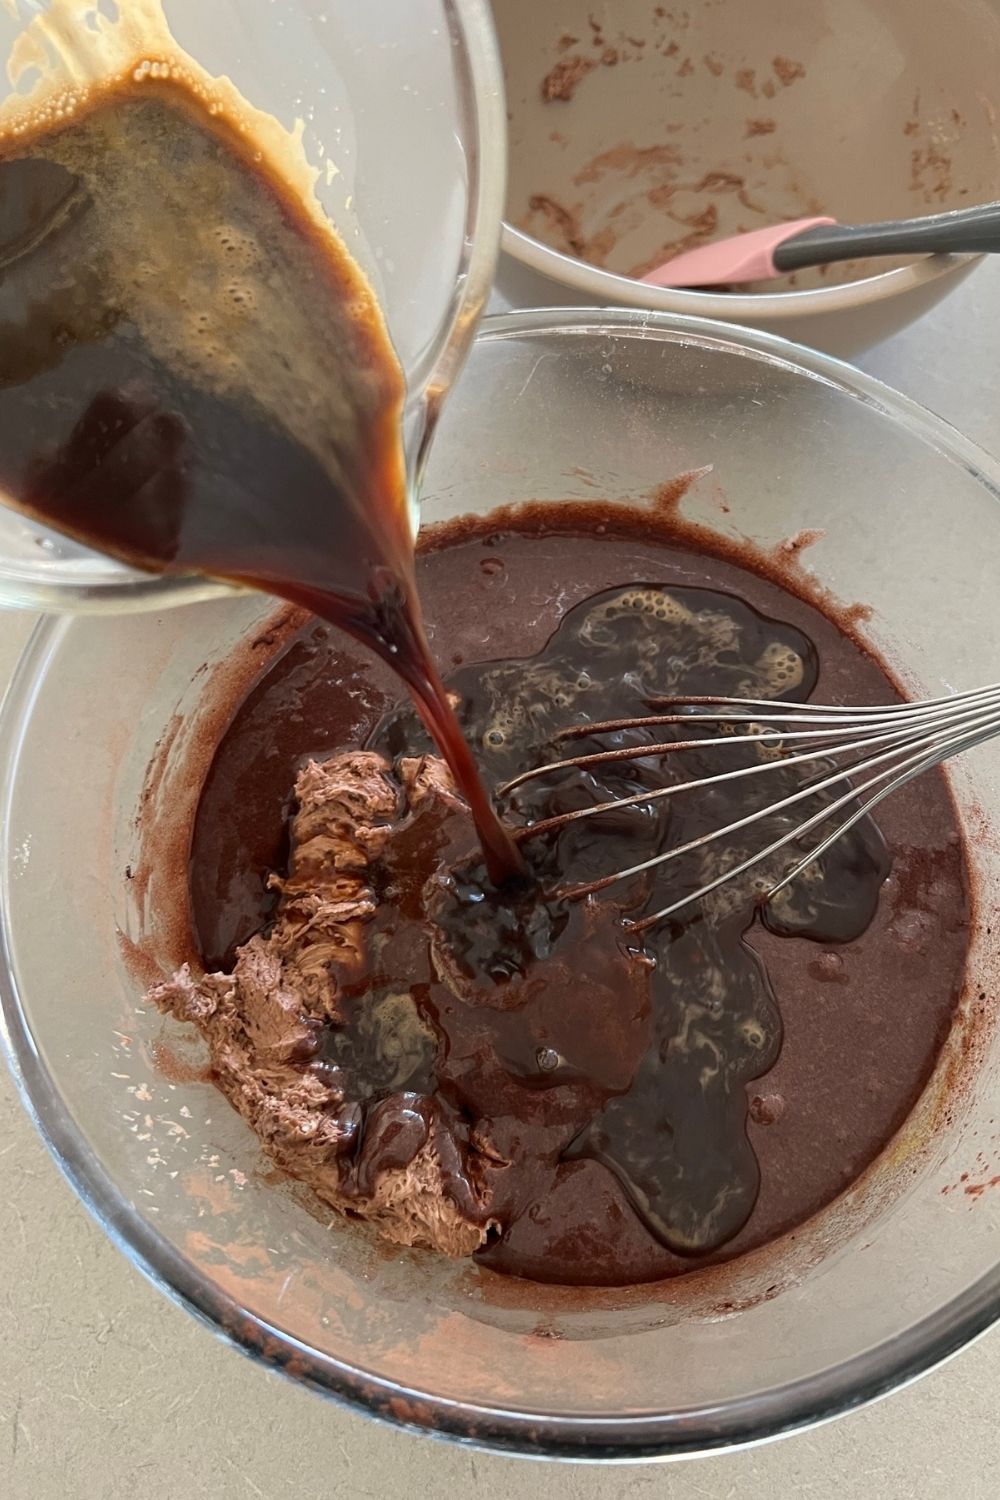 Adding hot coffee and preferment to sourdough chocolate cake batter